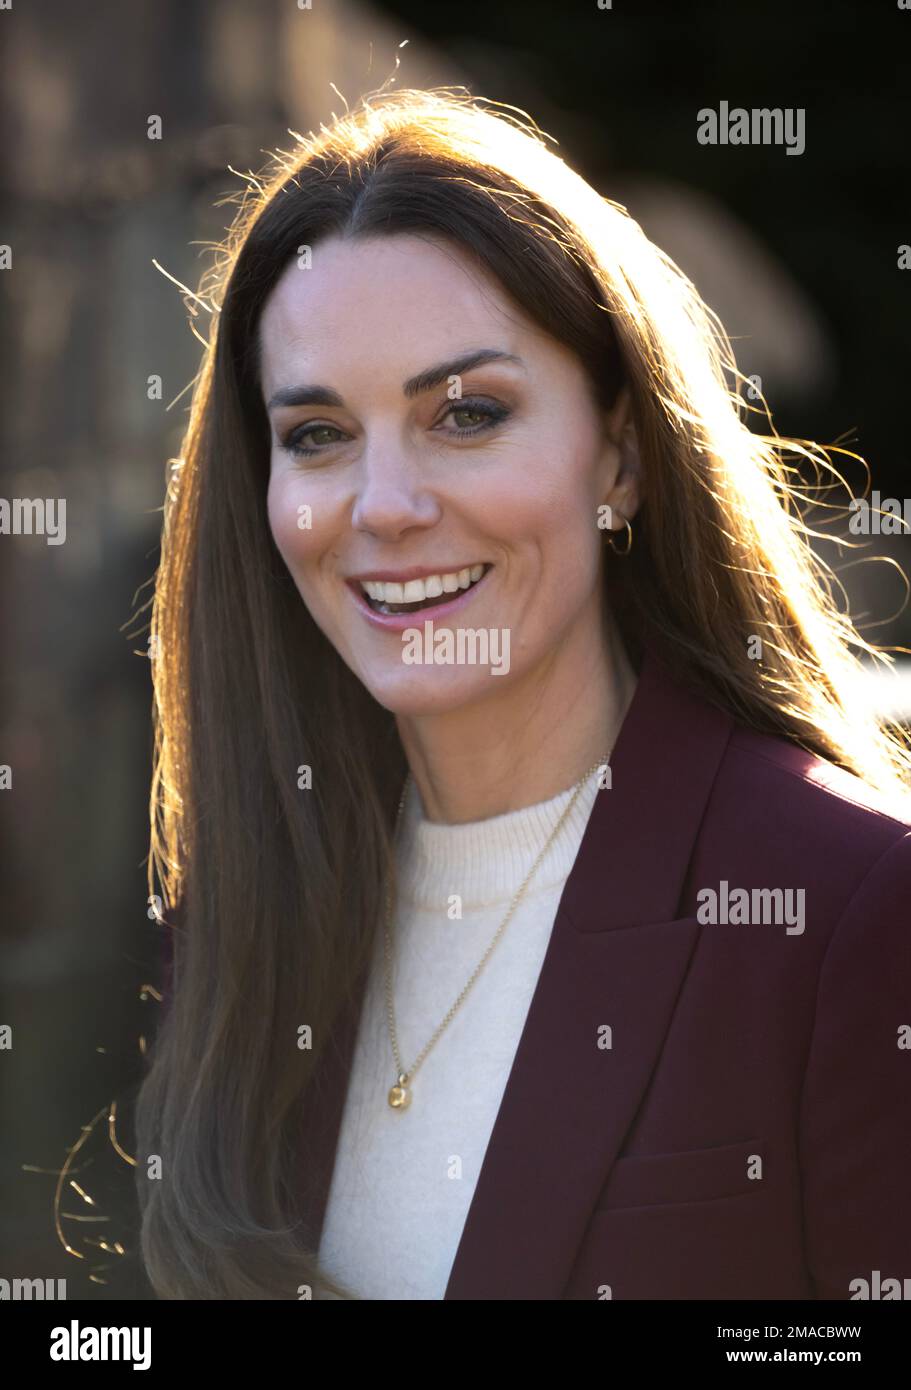 London, UK. 19th Jan, 2023. January 9th, 2023. London, UK. The Princess of Wales, Patron of the Rugby Football League, hosts a reception for the England Wheelchair Rugby League team in recognition of their success at the recent Rugby League World Cup, at Hampton Court Palace. Credit: Doug Peters/Alamy Live News Stock Photo